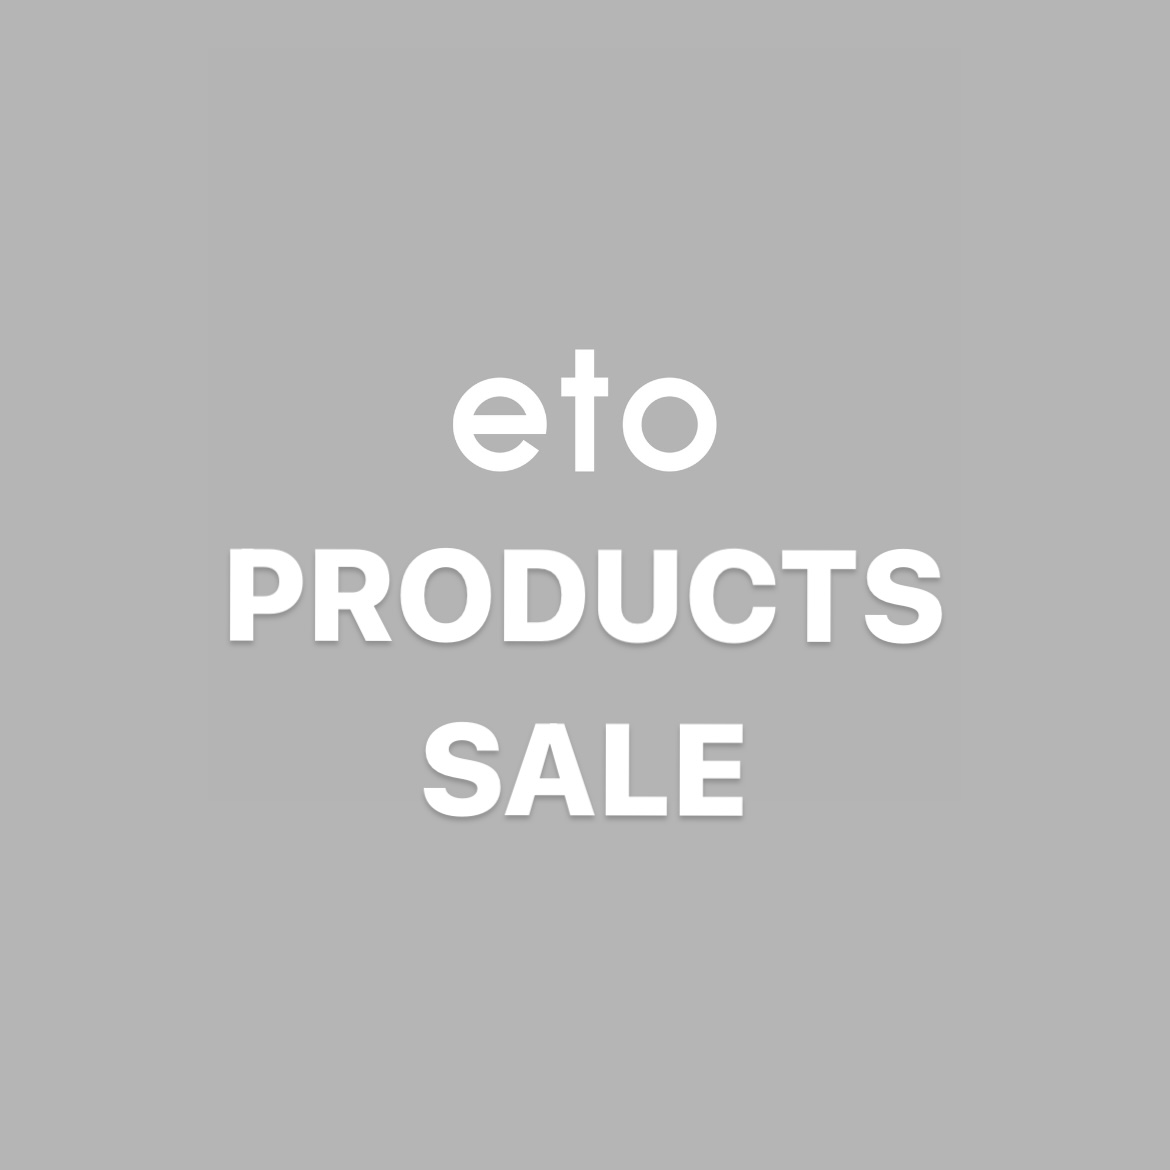 PRODUCTS SALE